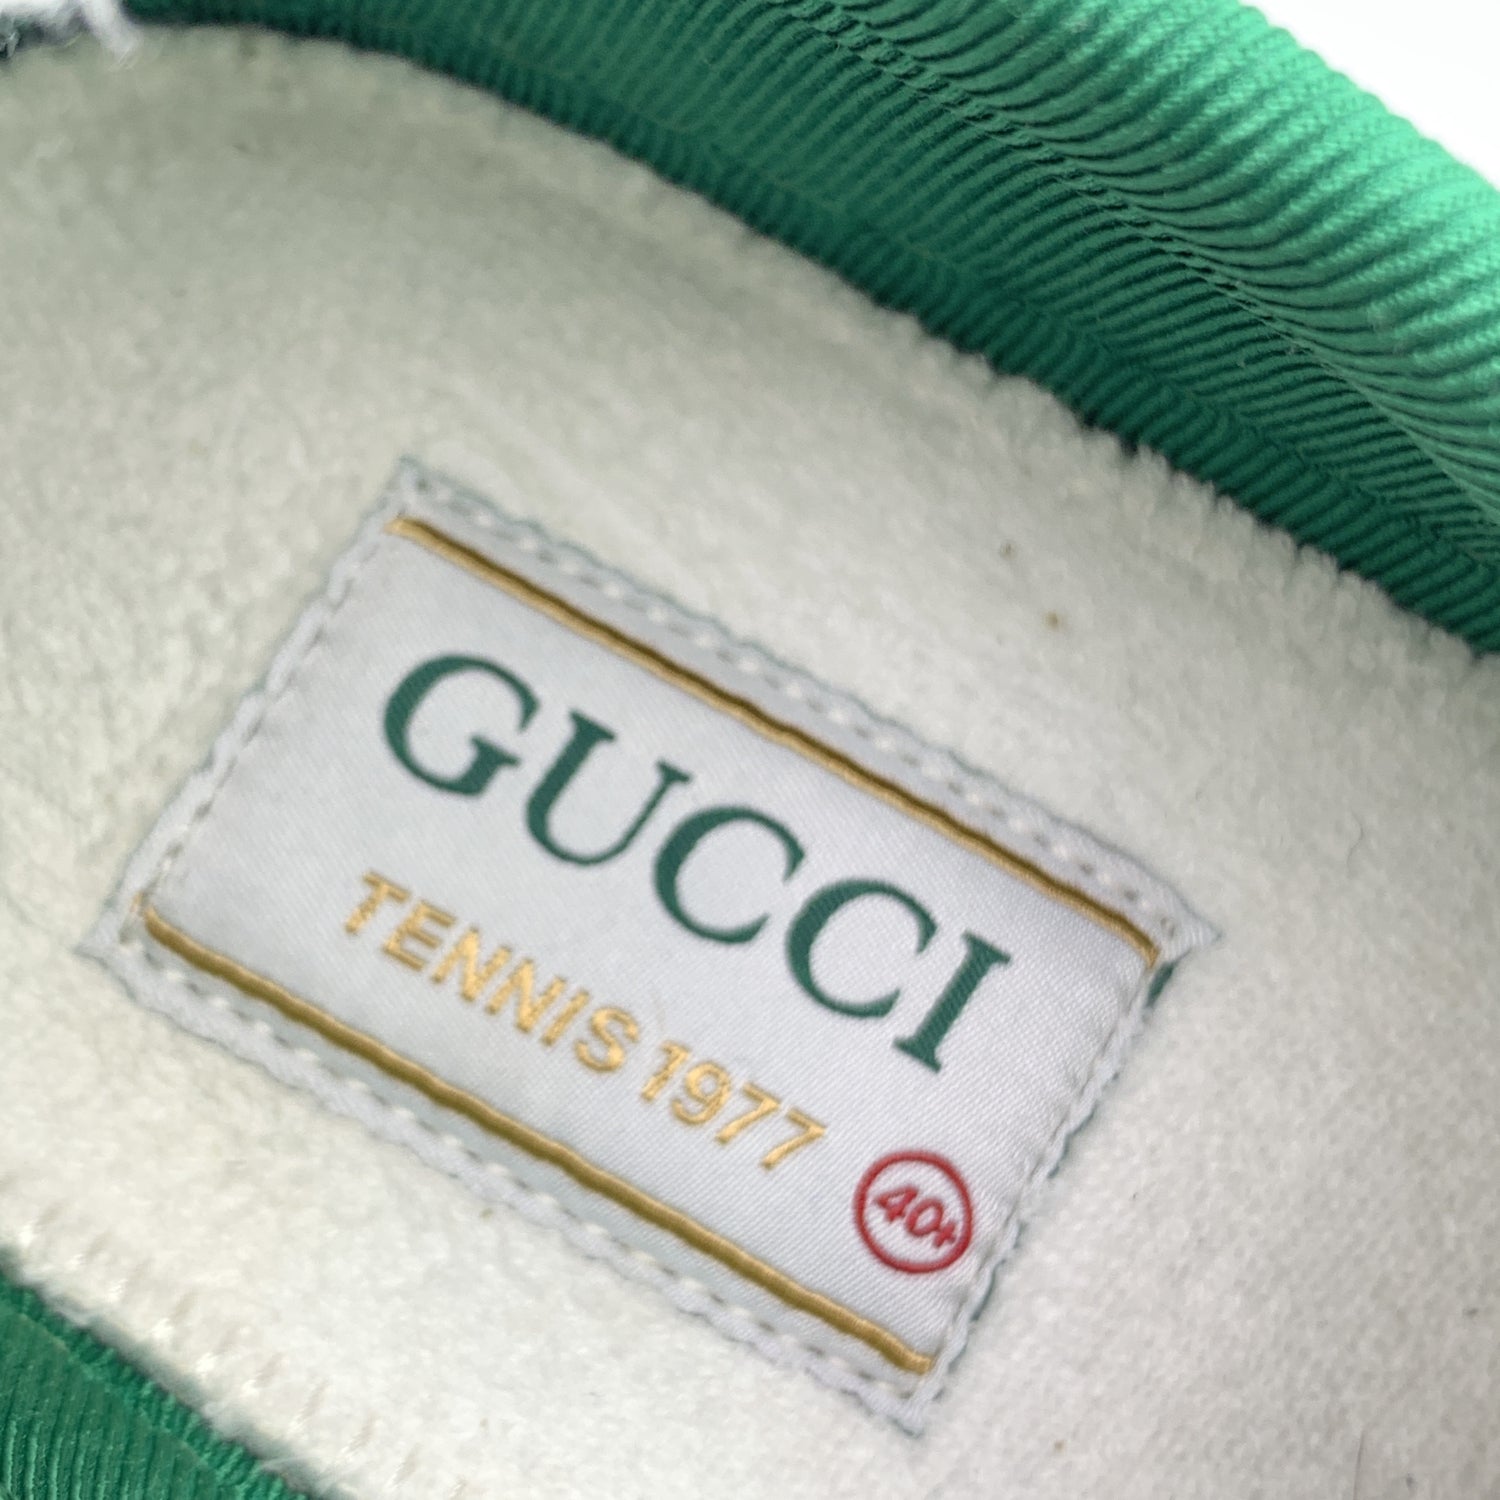 GUCCI Sneakers